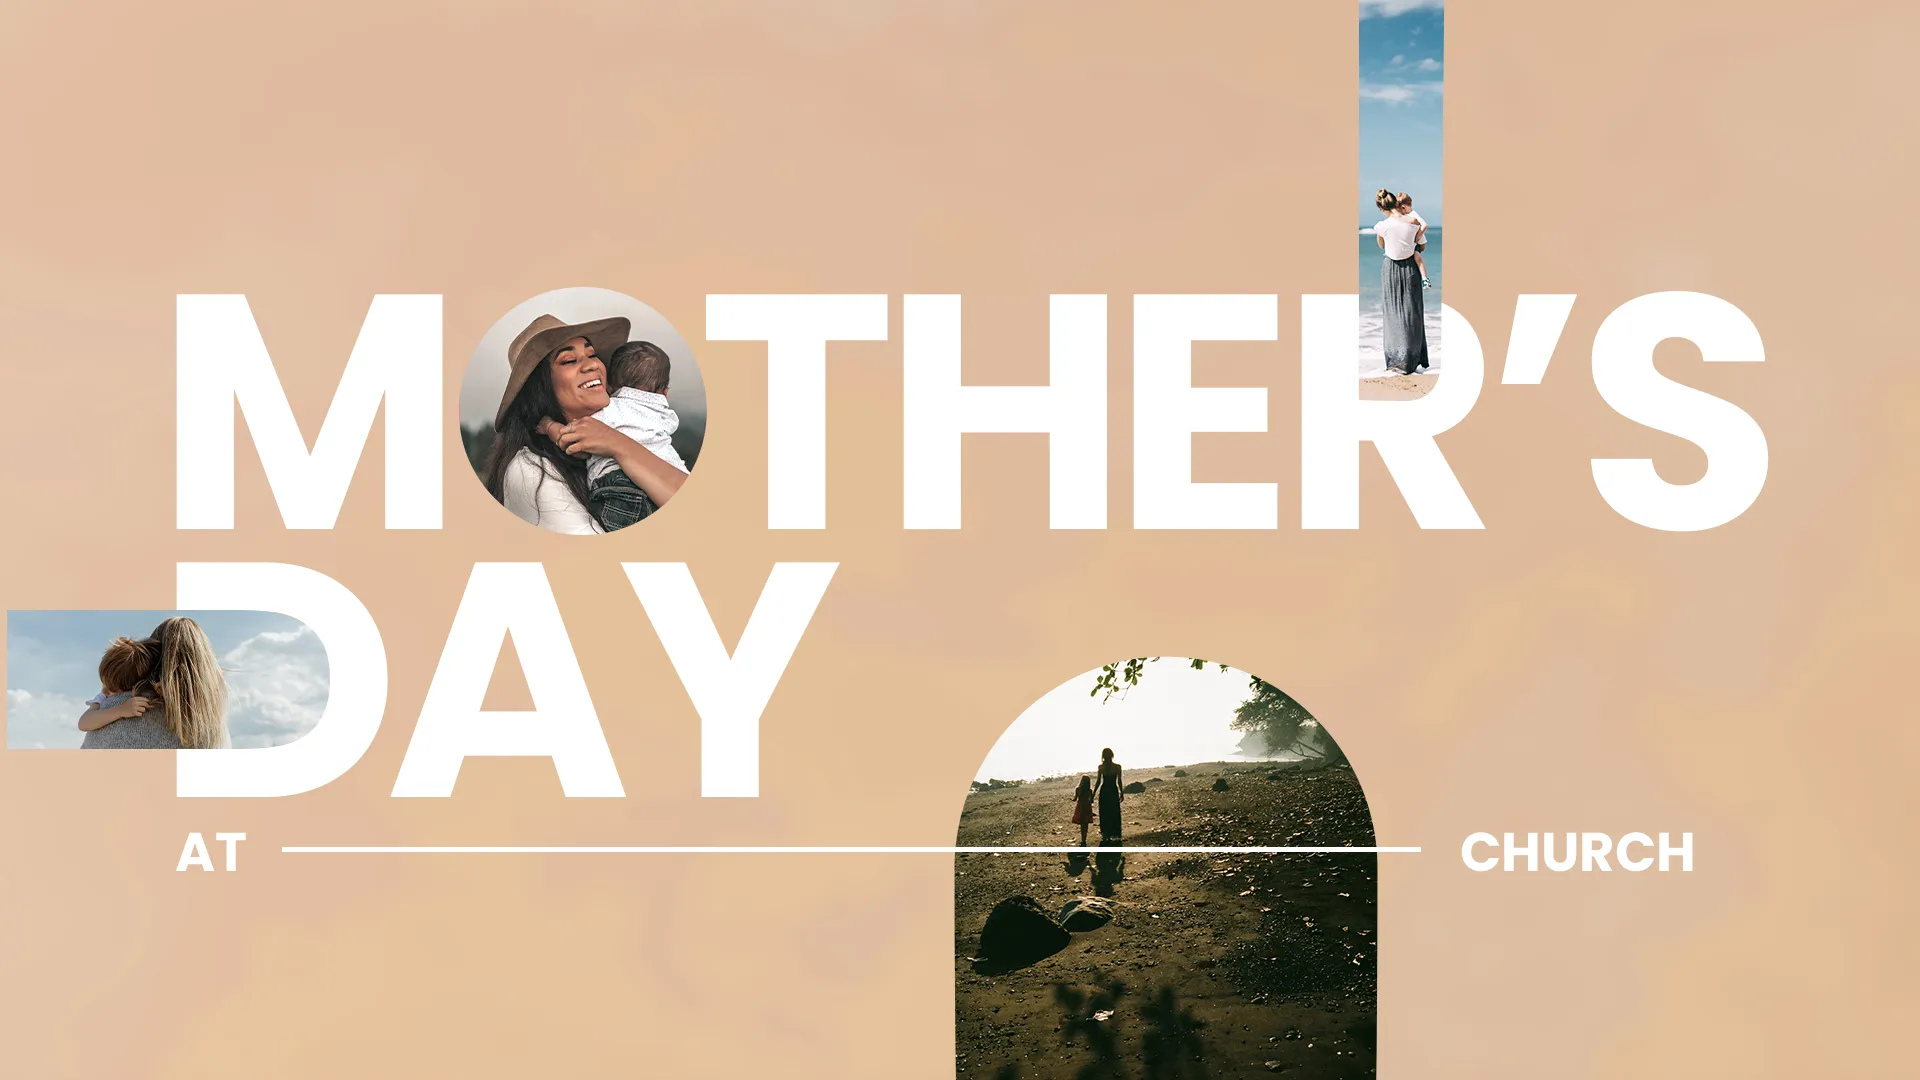 Honor The Nurturing Spirit Of Motherhood With This Heartwarming &Quot;Mother'S Day&Quot; Graphic. Its Collage Of Tender Moments Beautifully Complements Church Media, Inviting Reflection On The Love And Care Unique To Mothers.